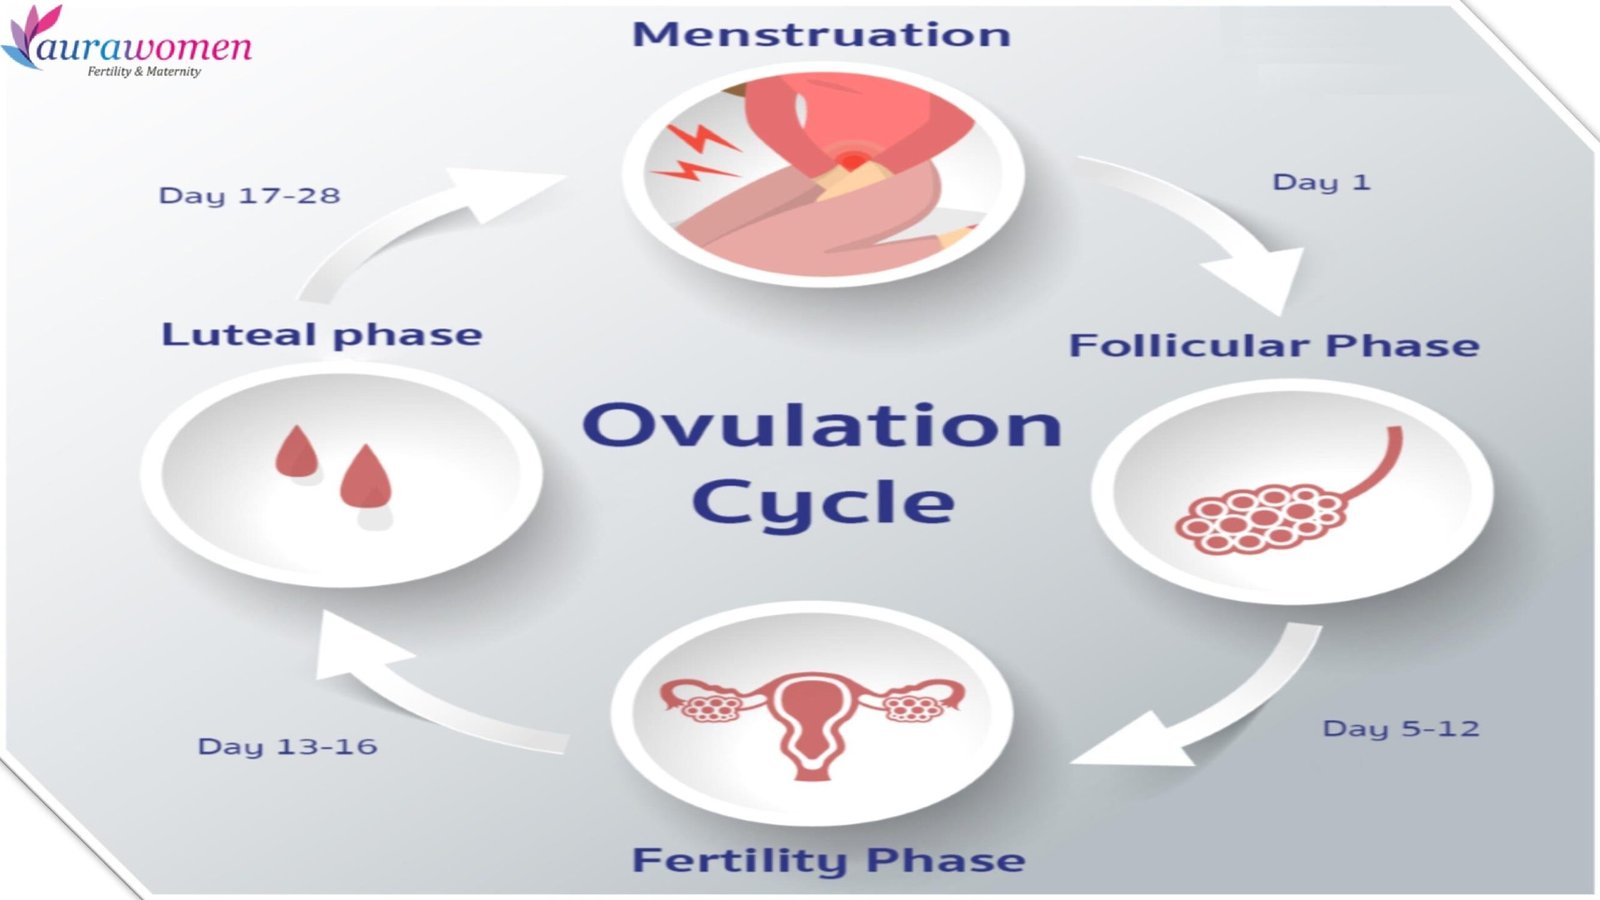 WHAT IS OVULATION